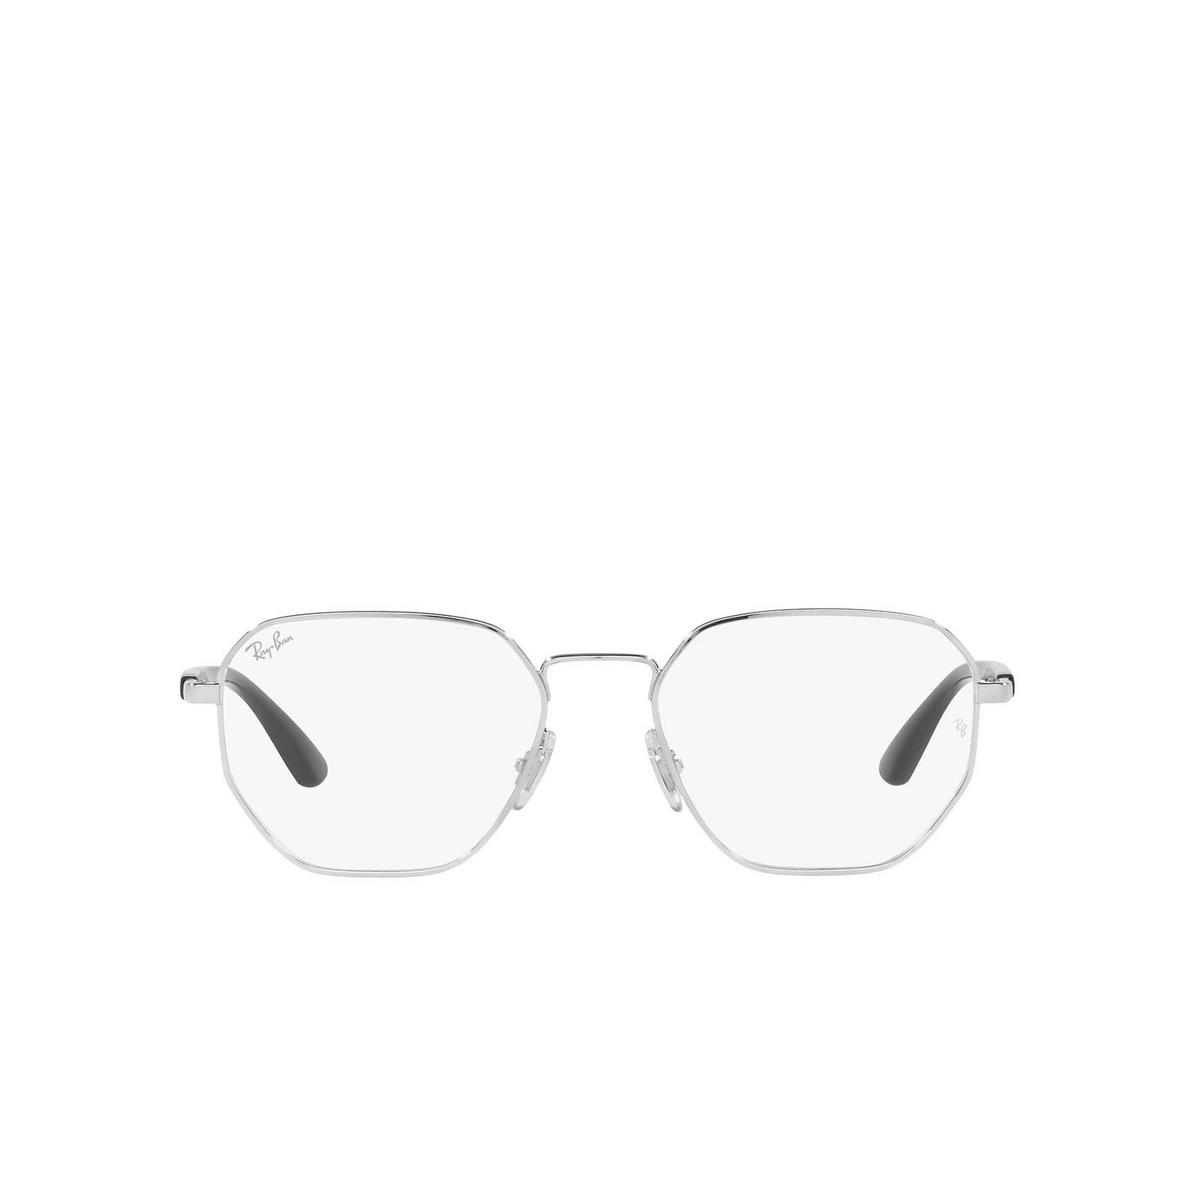 Ray-Ban RX6471 Eyeglasses 2501 Silver - front view